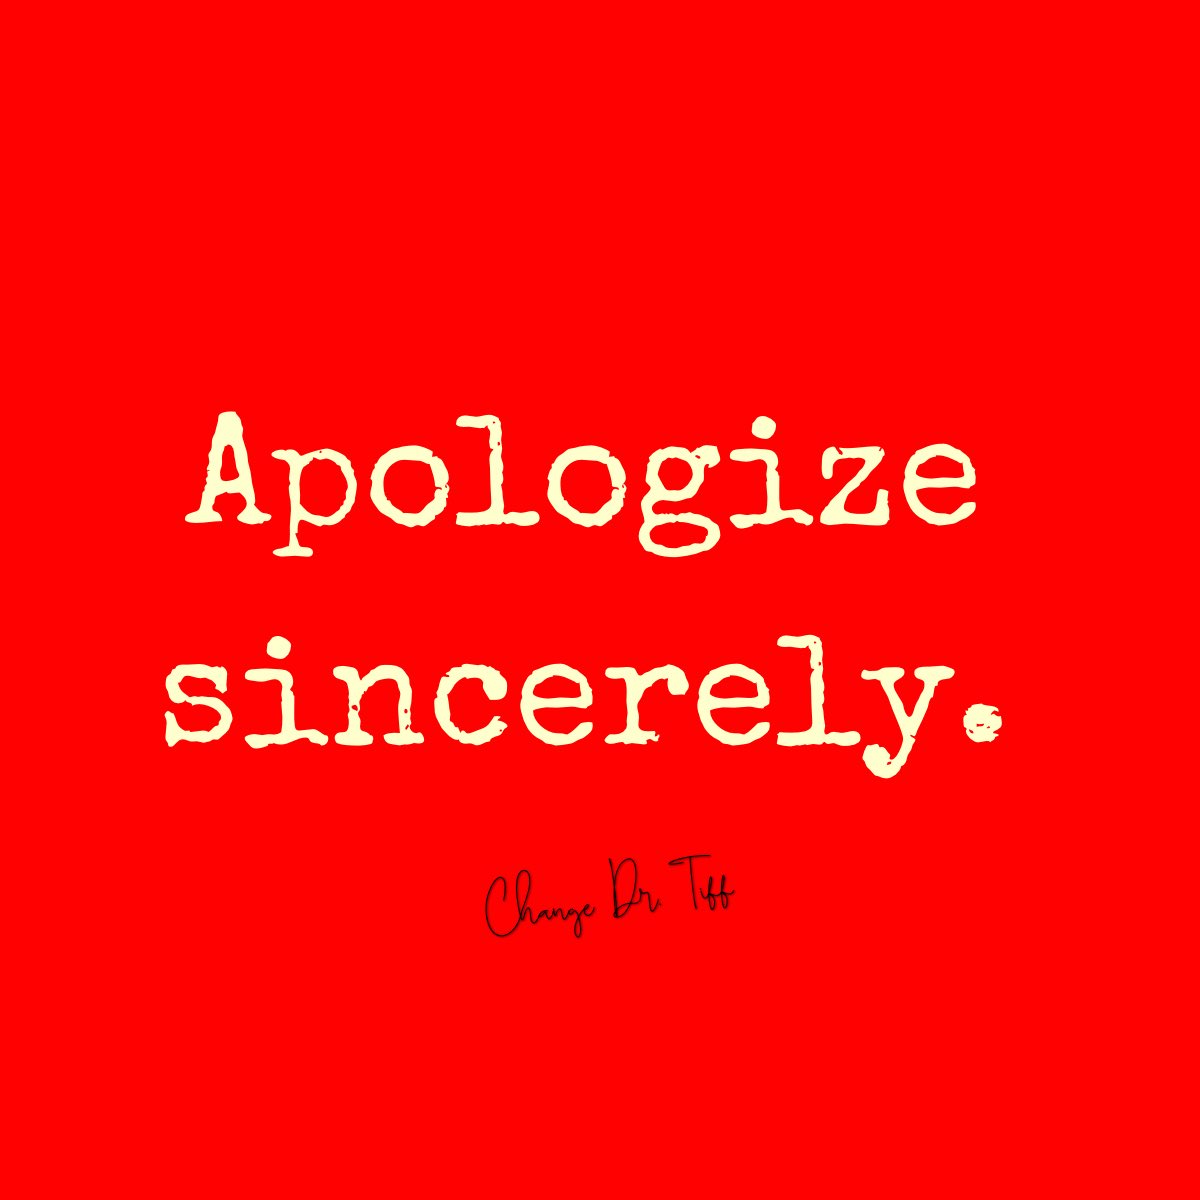 Apologize sincerely and take responsibility for mistakes.

#BeTheChange #ChangeDrTiff